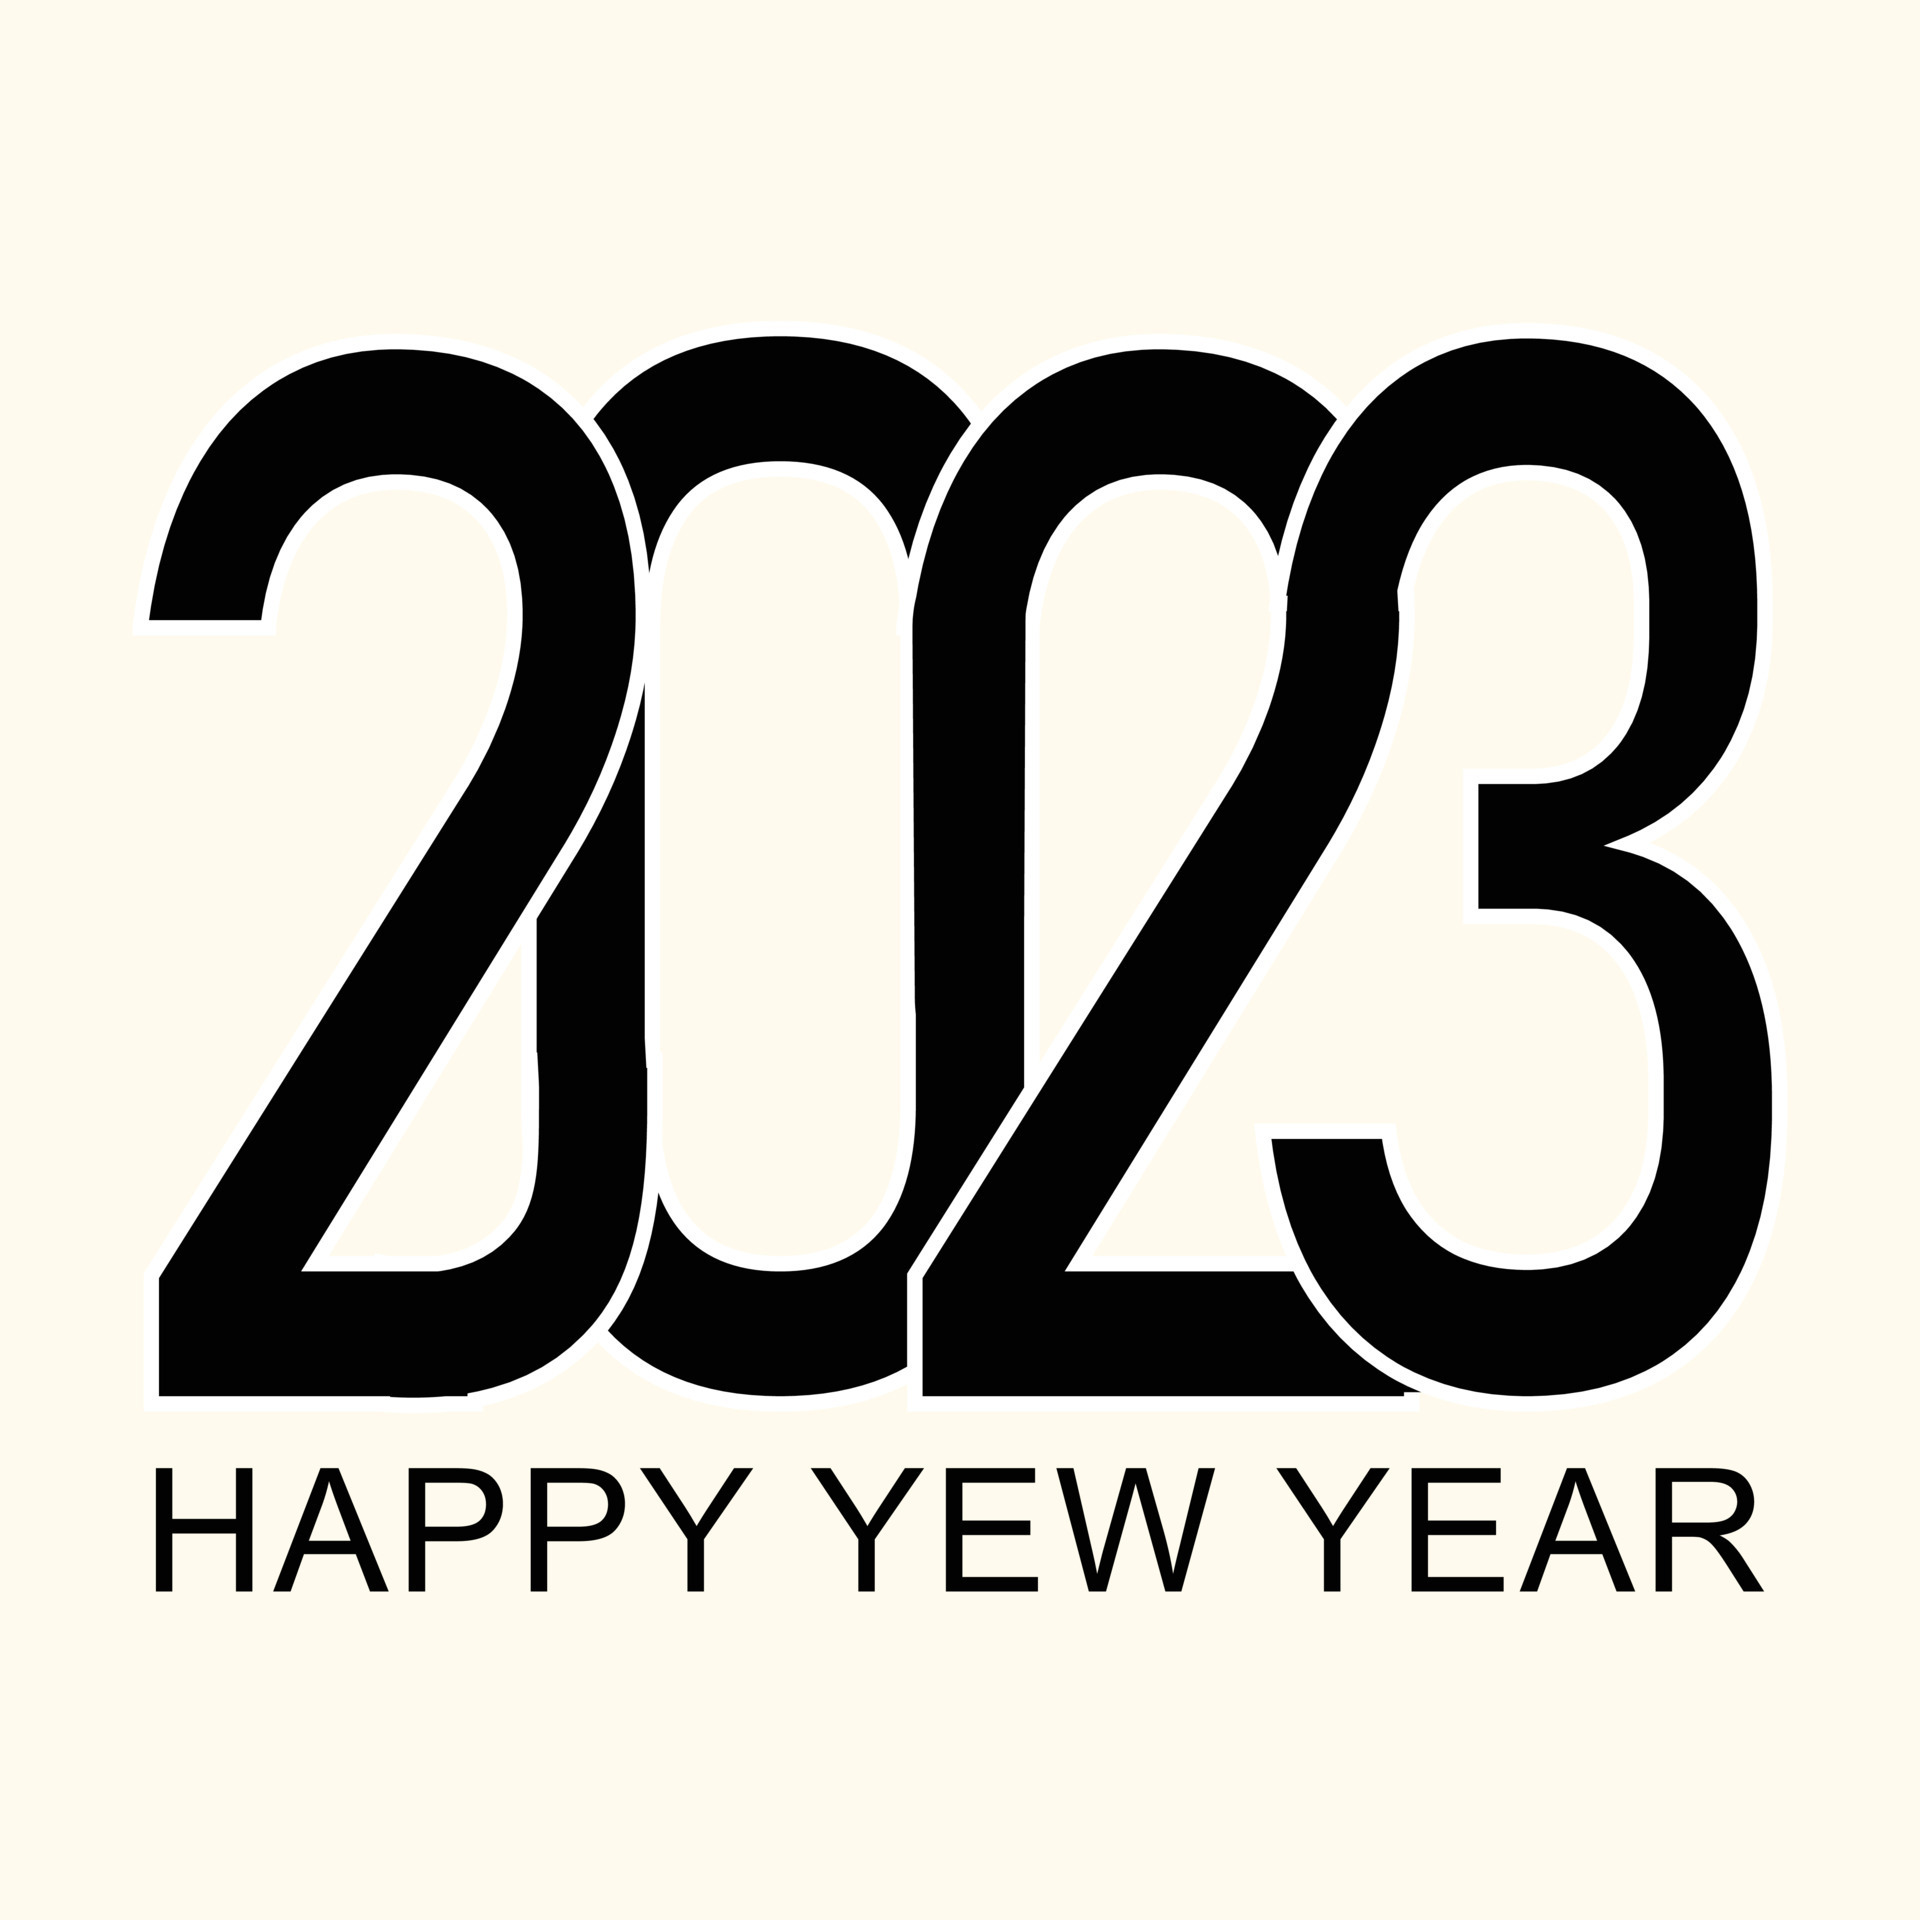 The 2023 New Year's greeting silhouette design in calm and soft